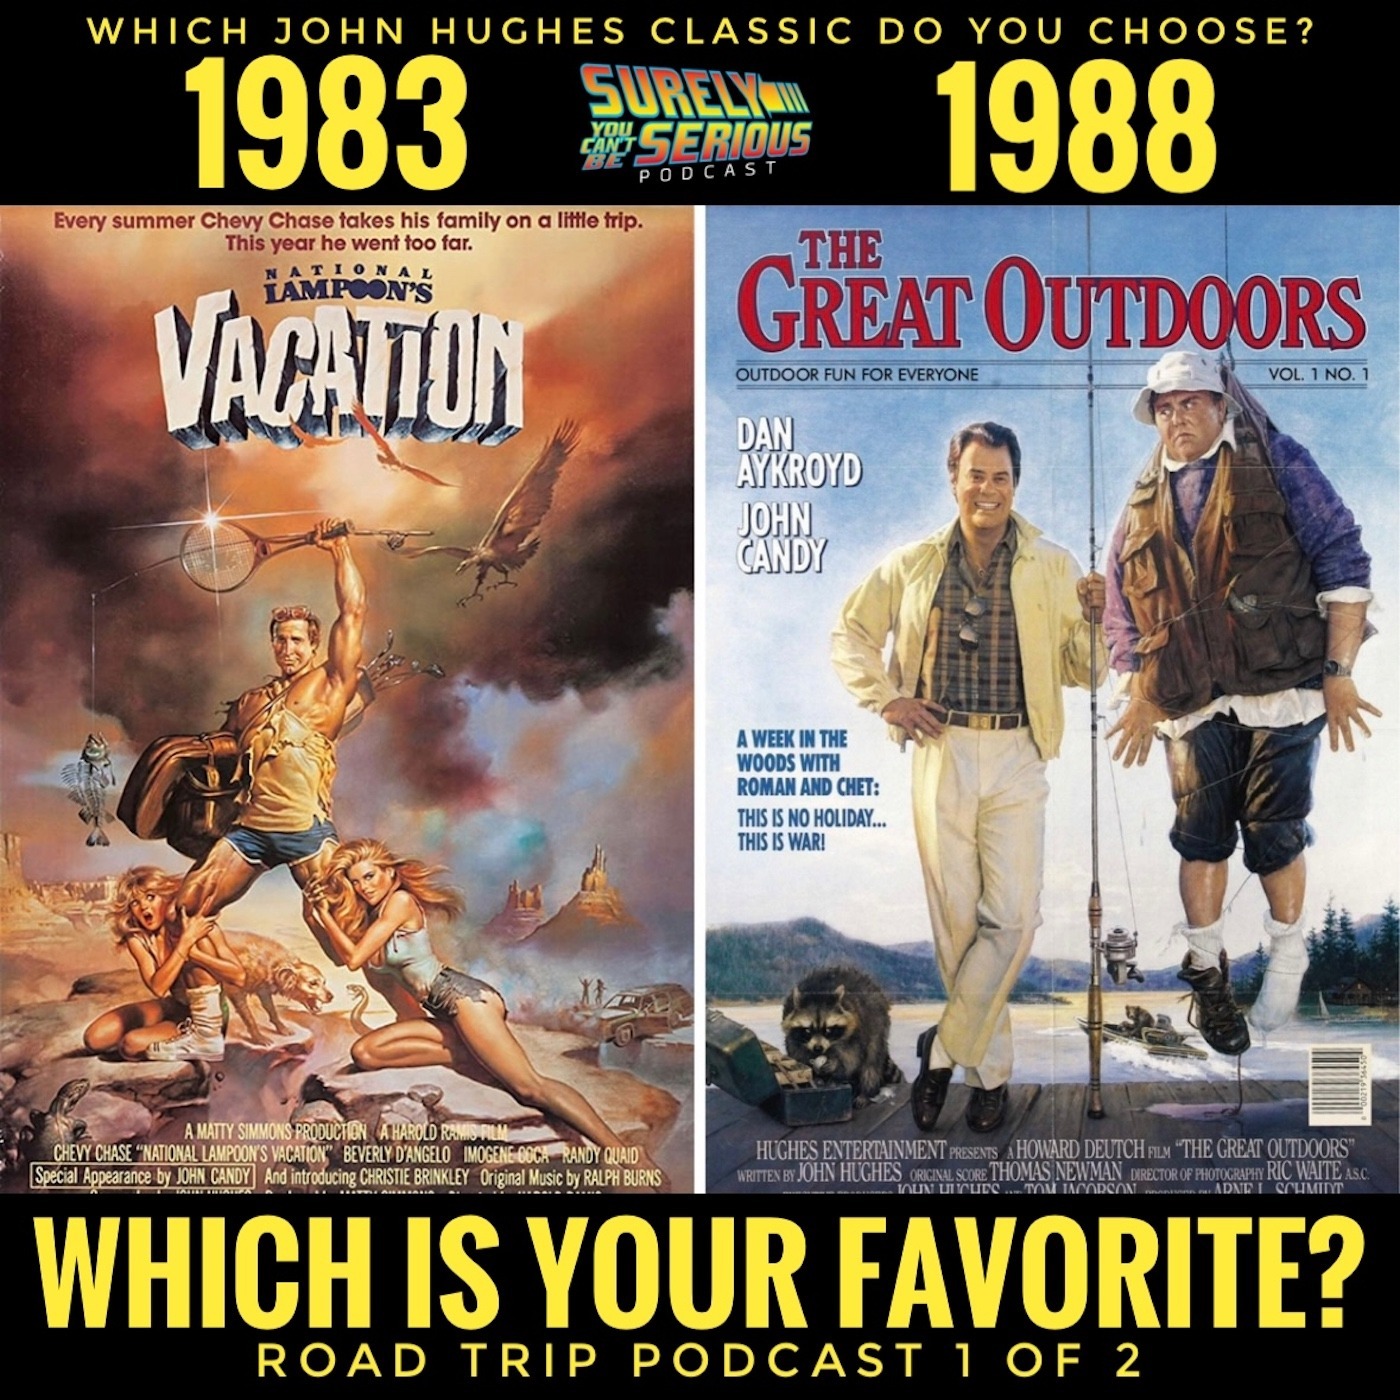 Vacation (1983) vs. The Great Outdoors (1988): Part 1